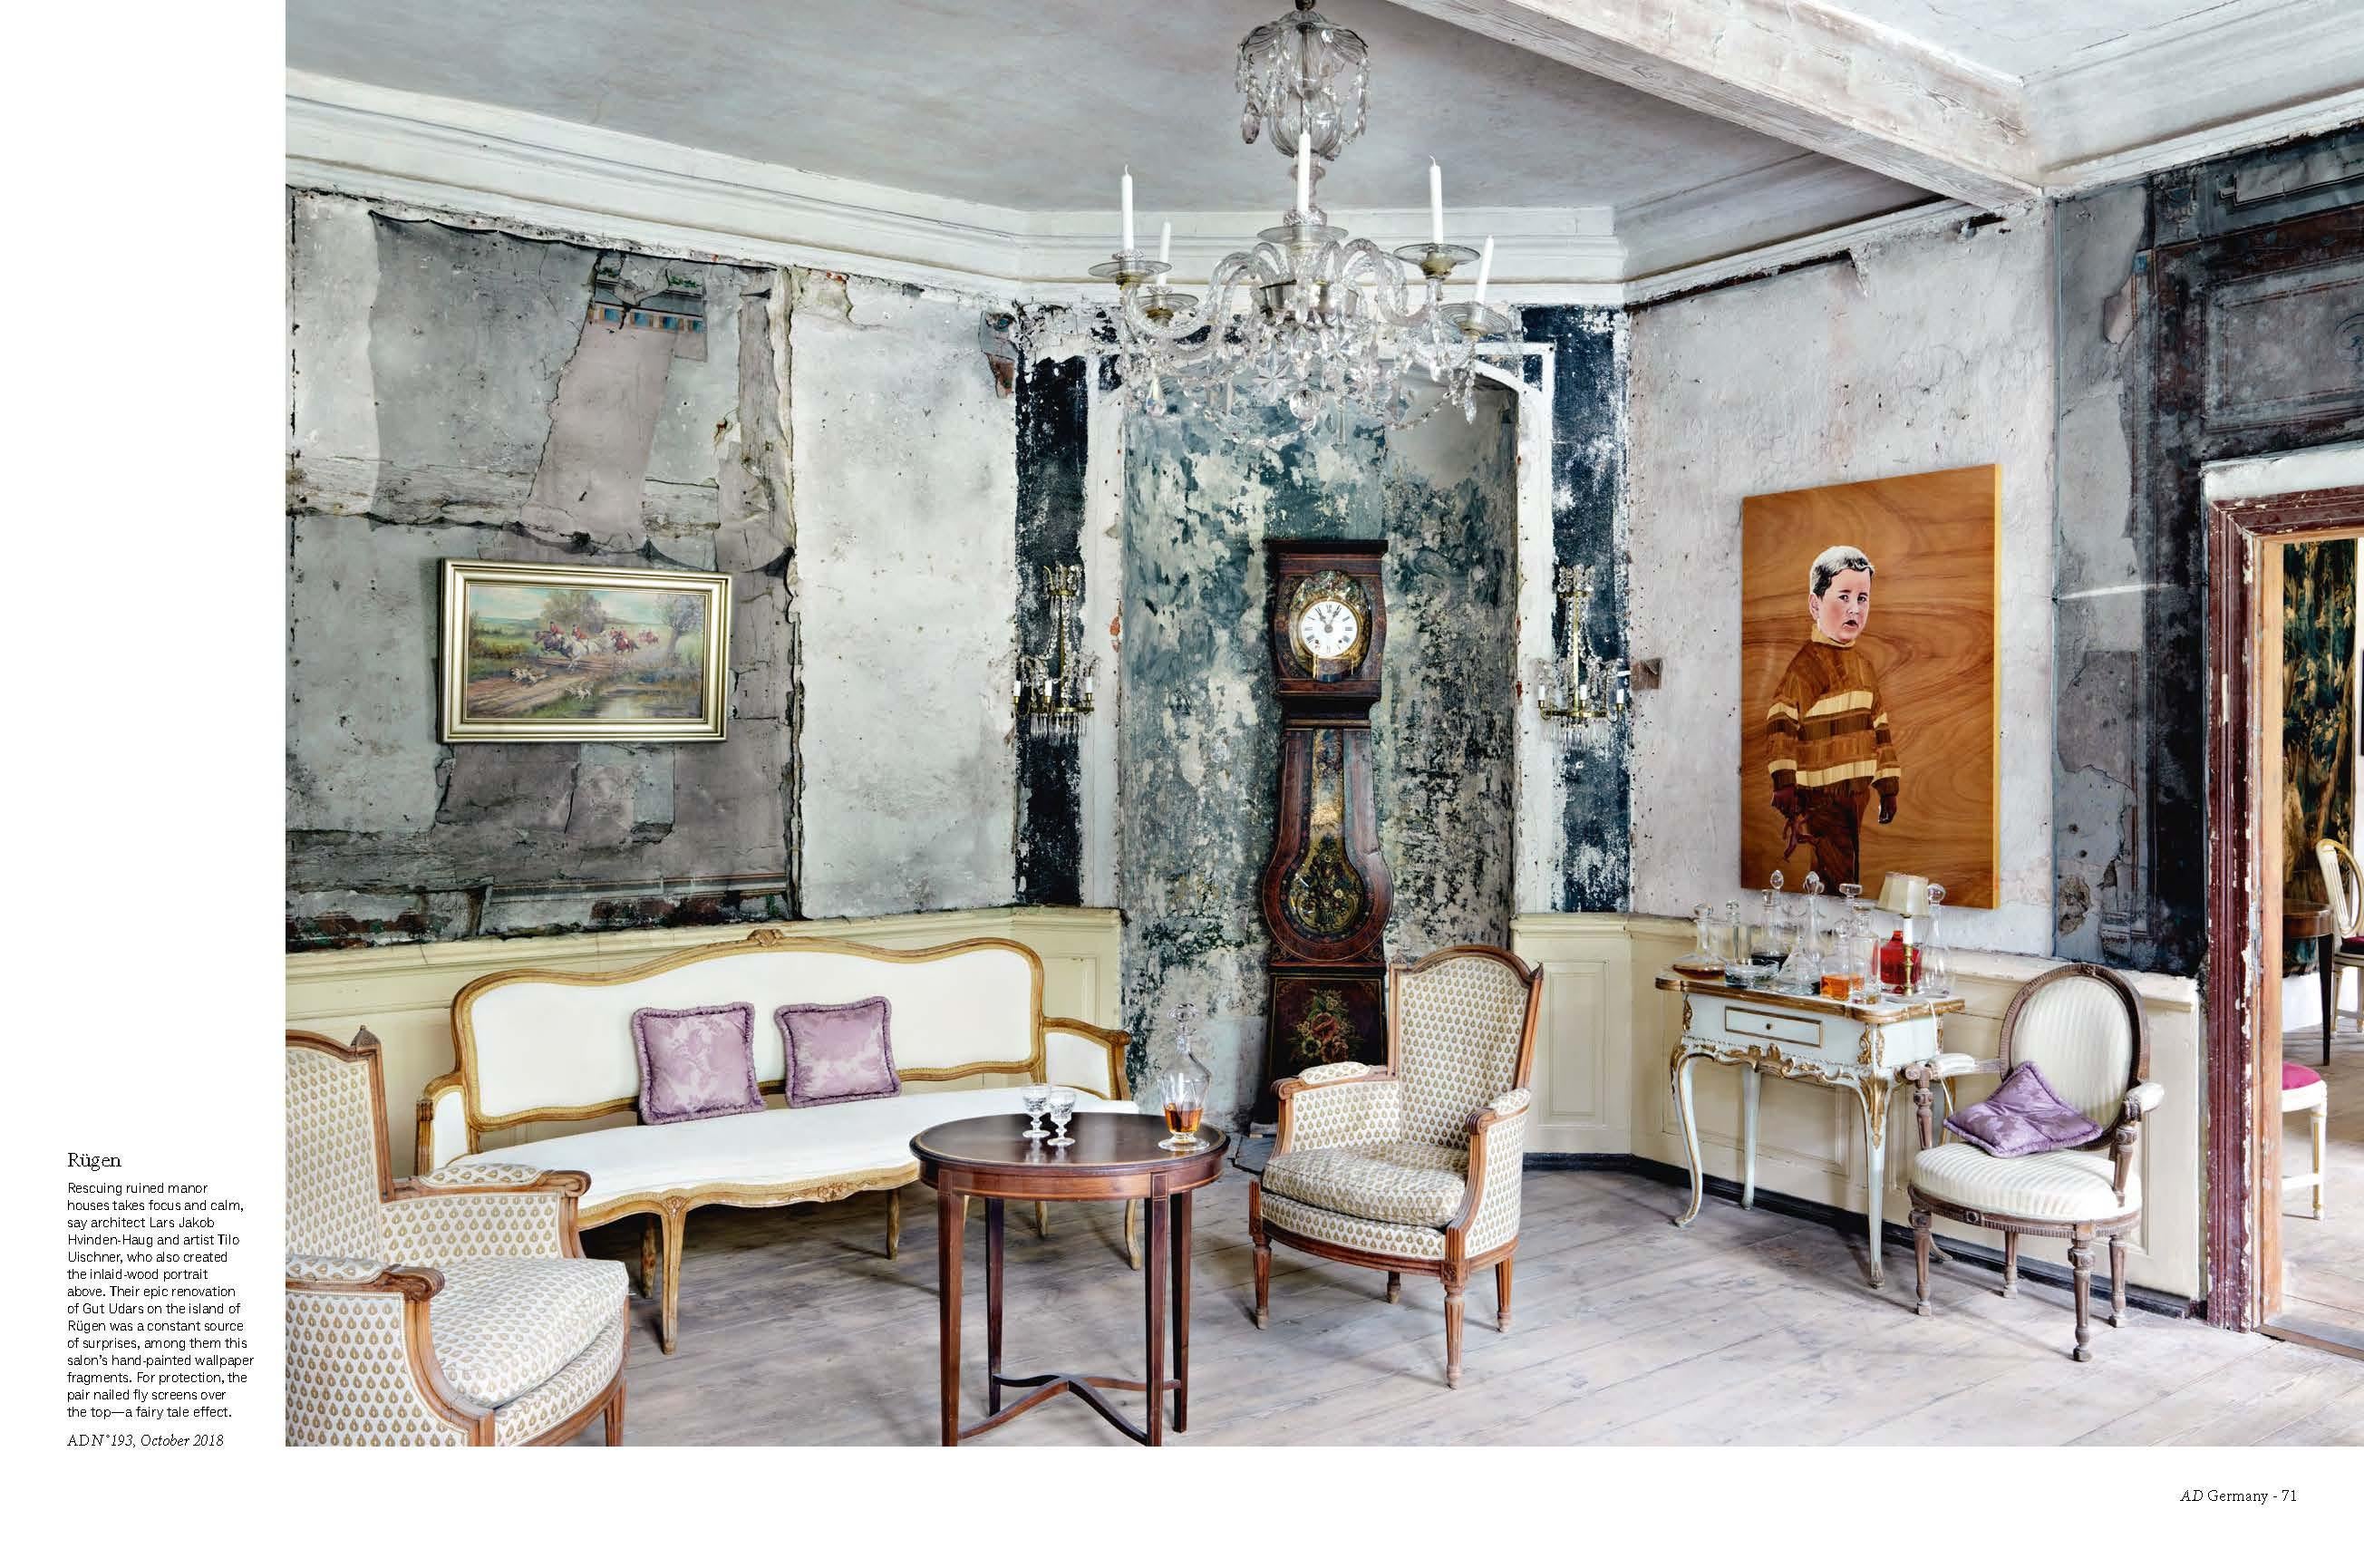 American Architectural Digest The Most Beautiful Rooms in the World For Sale